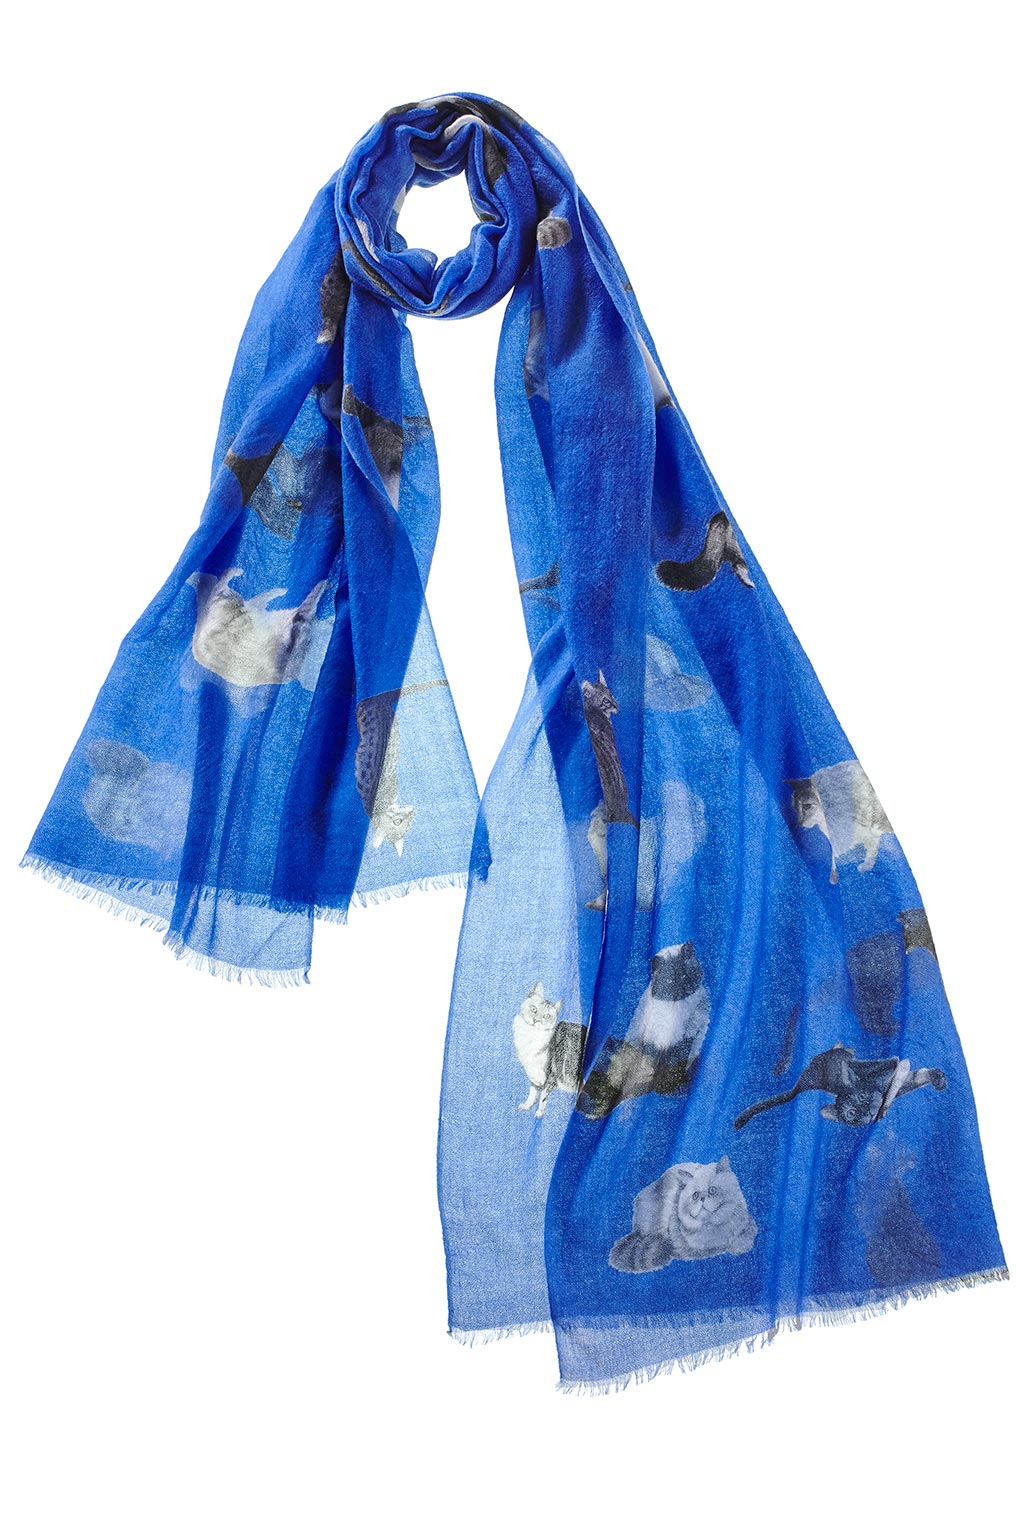 Alpine Cashmere's Featherweight Cashmere Cat Scarf in lapis blue